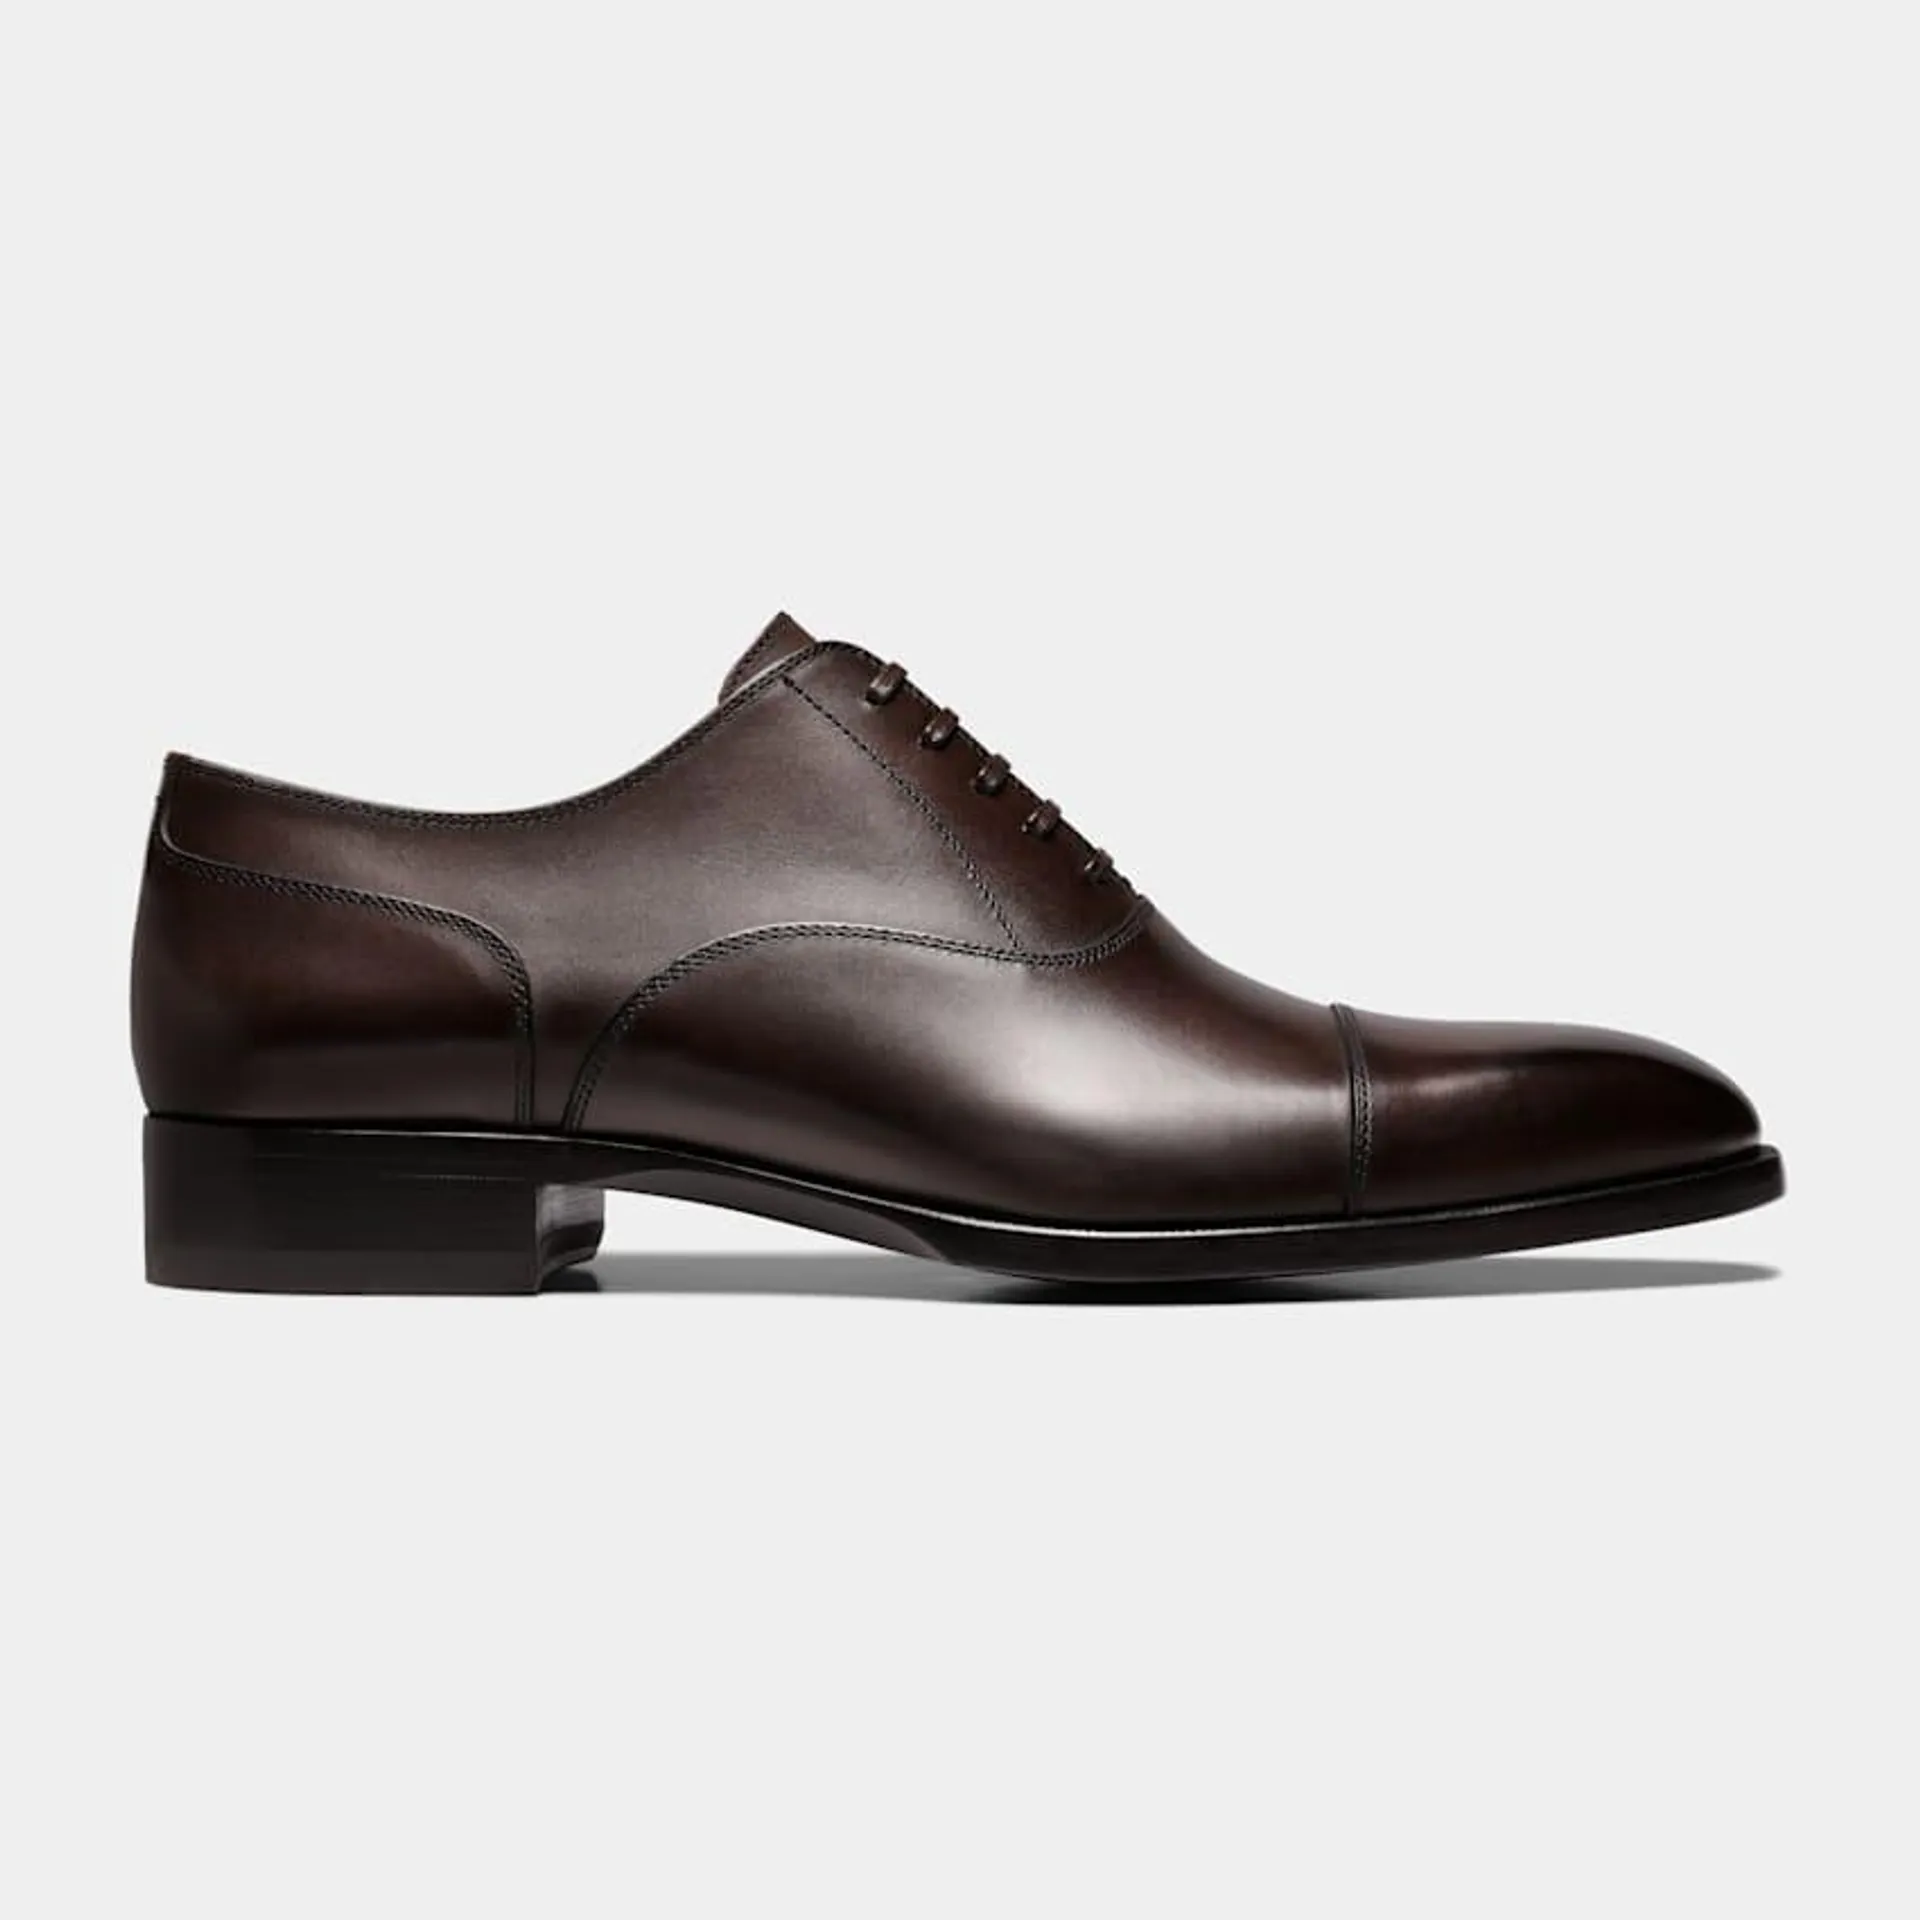 The classic finishing touch to a formal look, these brown Oxfords are crafted in Italy from supple Italian calf leather in a Blake stitch, and feature full leather lining and sole.